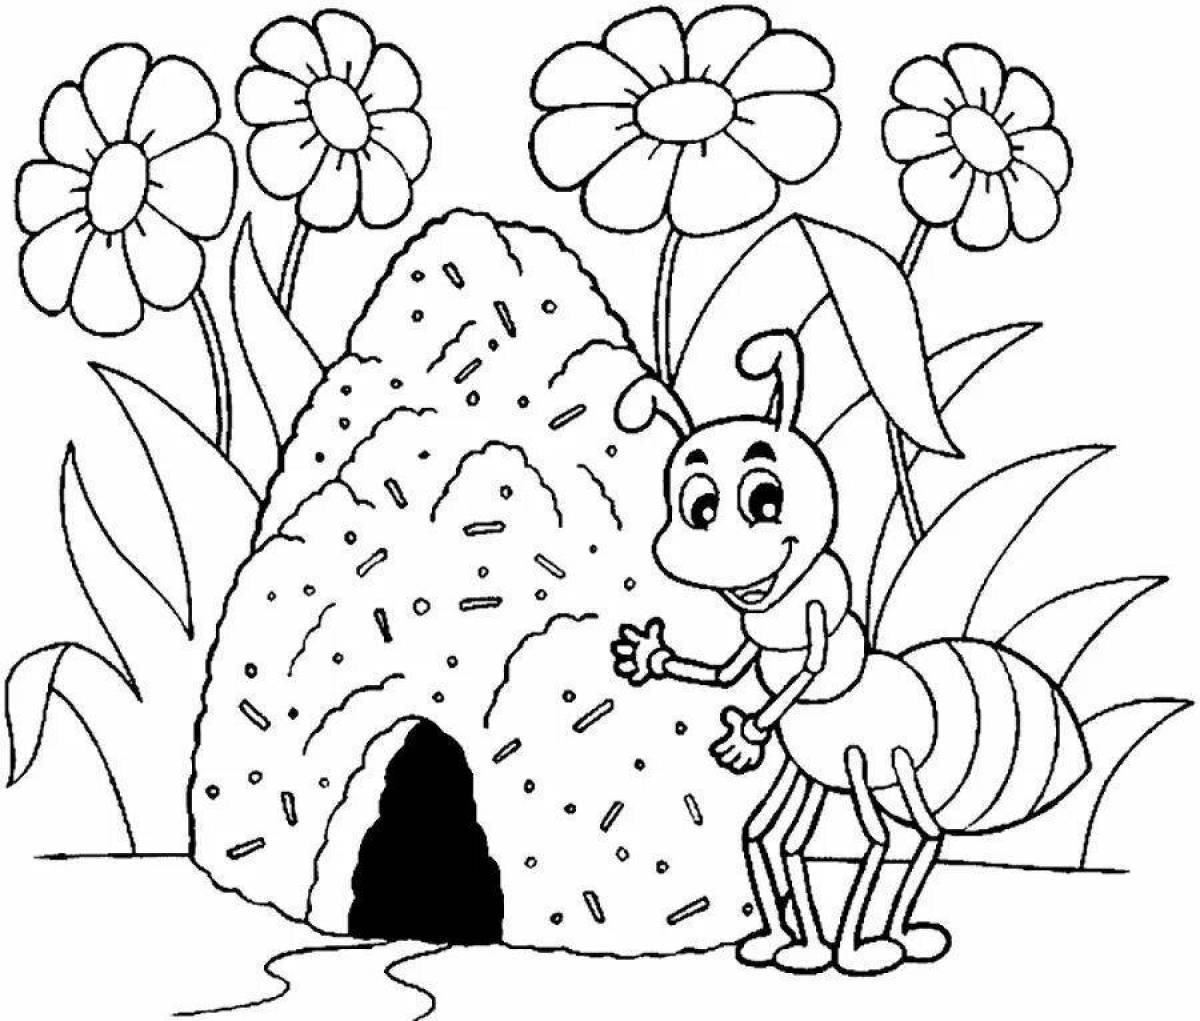 Coloring book beckoning anthill